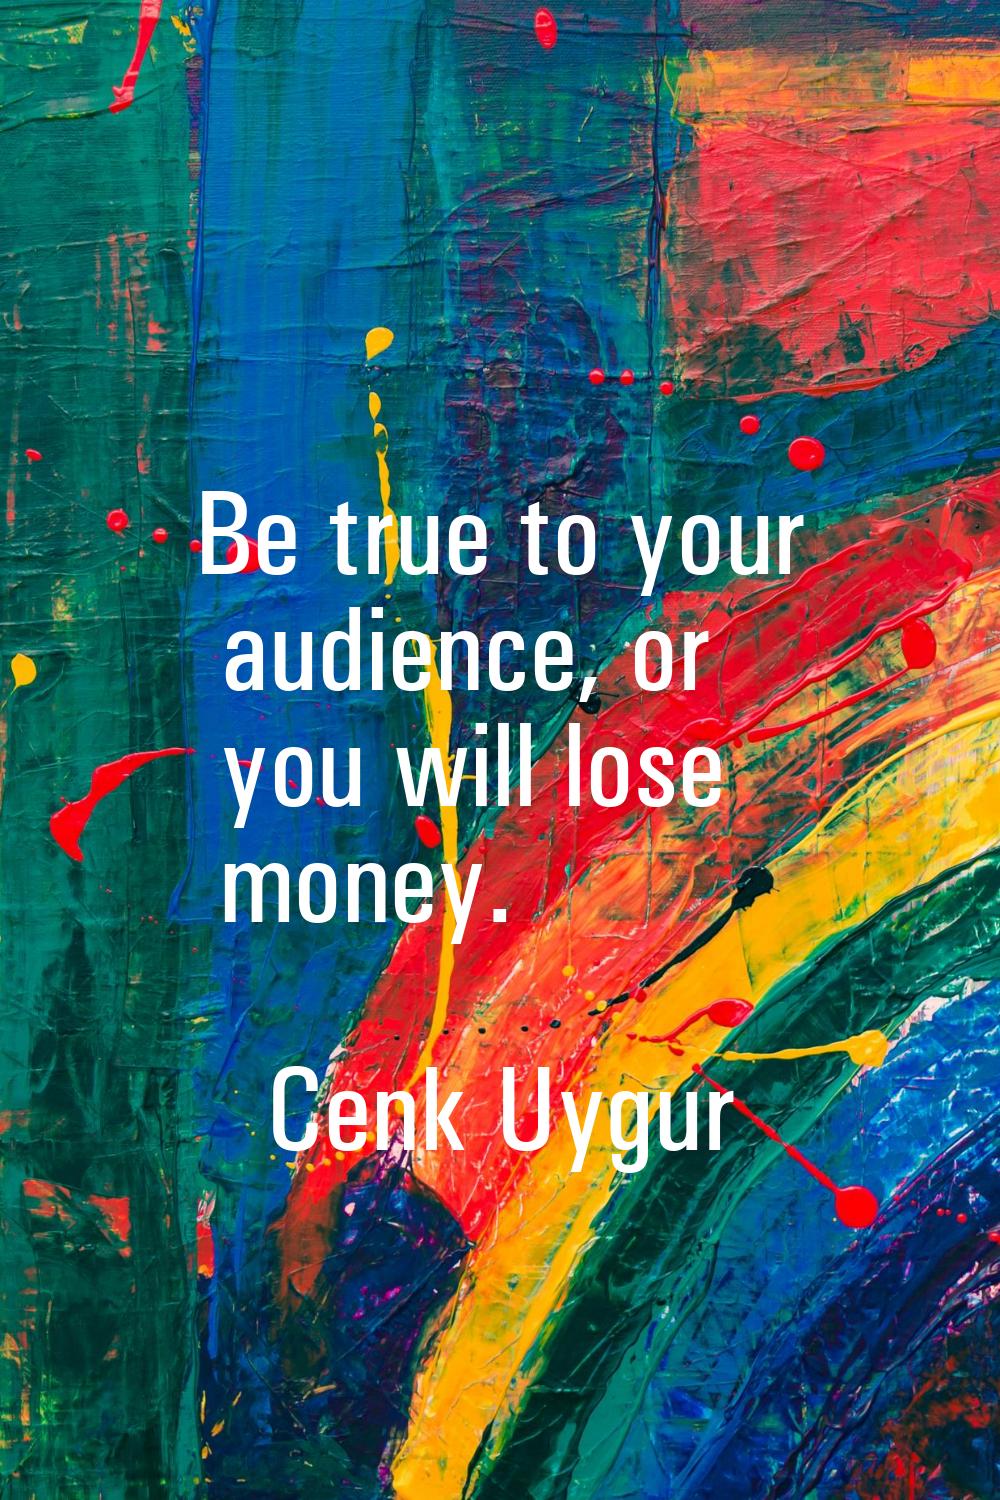 Be true to your audience, or you will lose money.